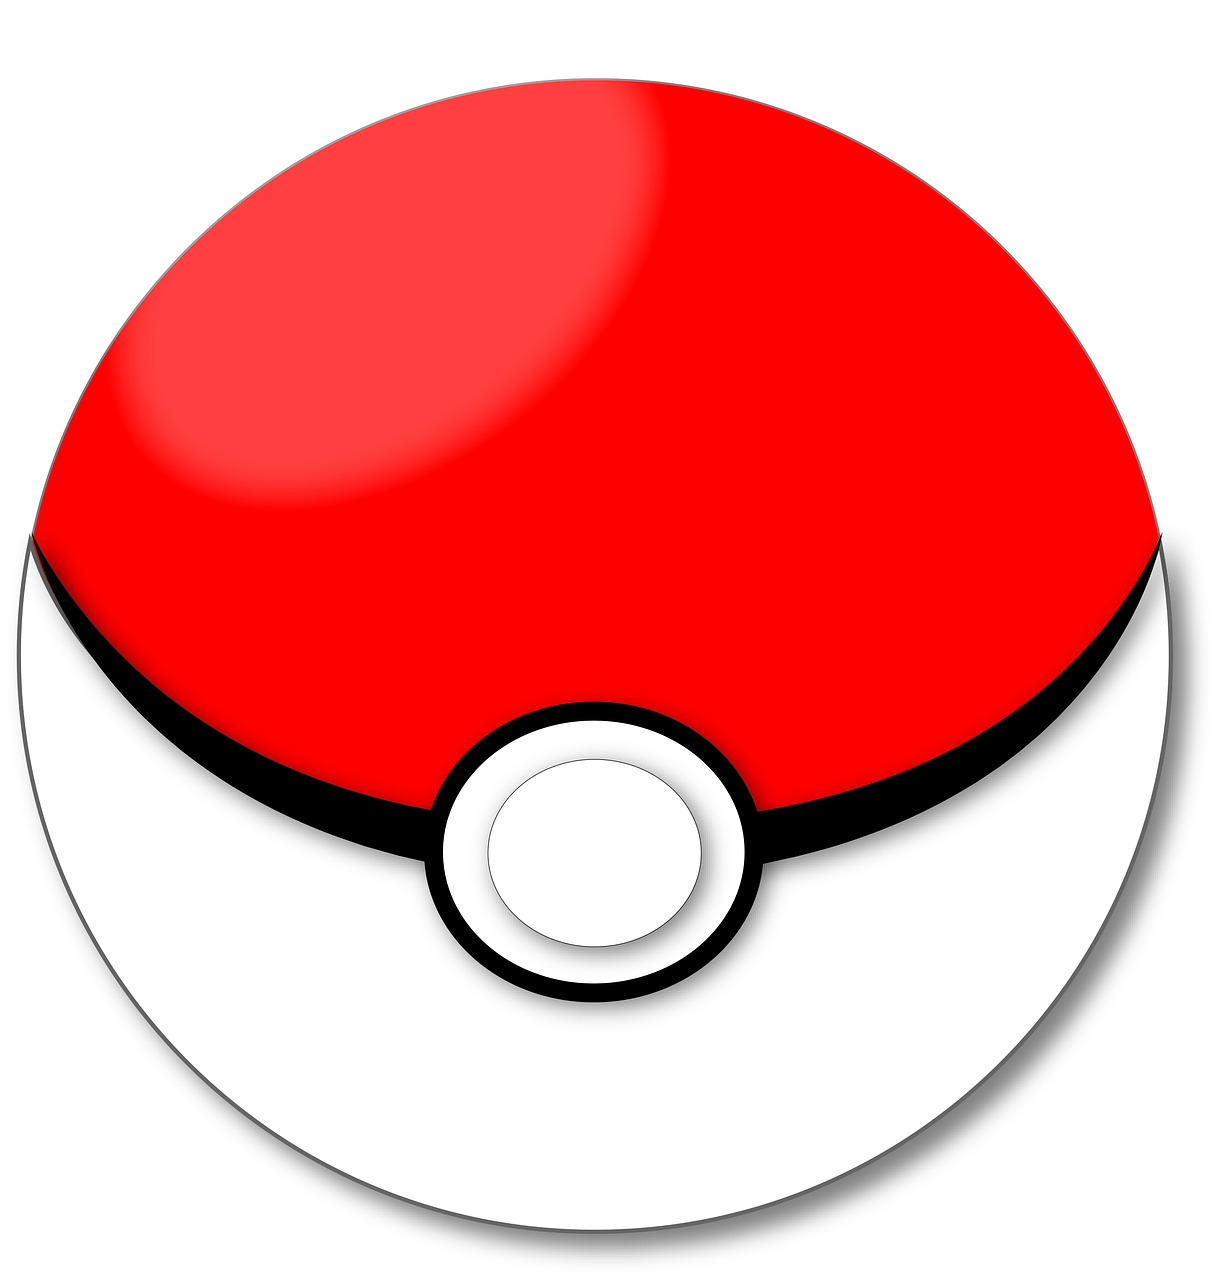 ball-pokemon-go-catch-free-pictures-free-image-from-needpix